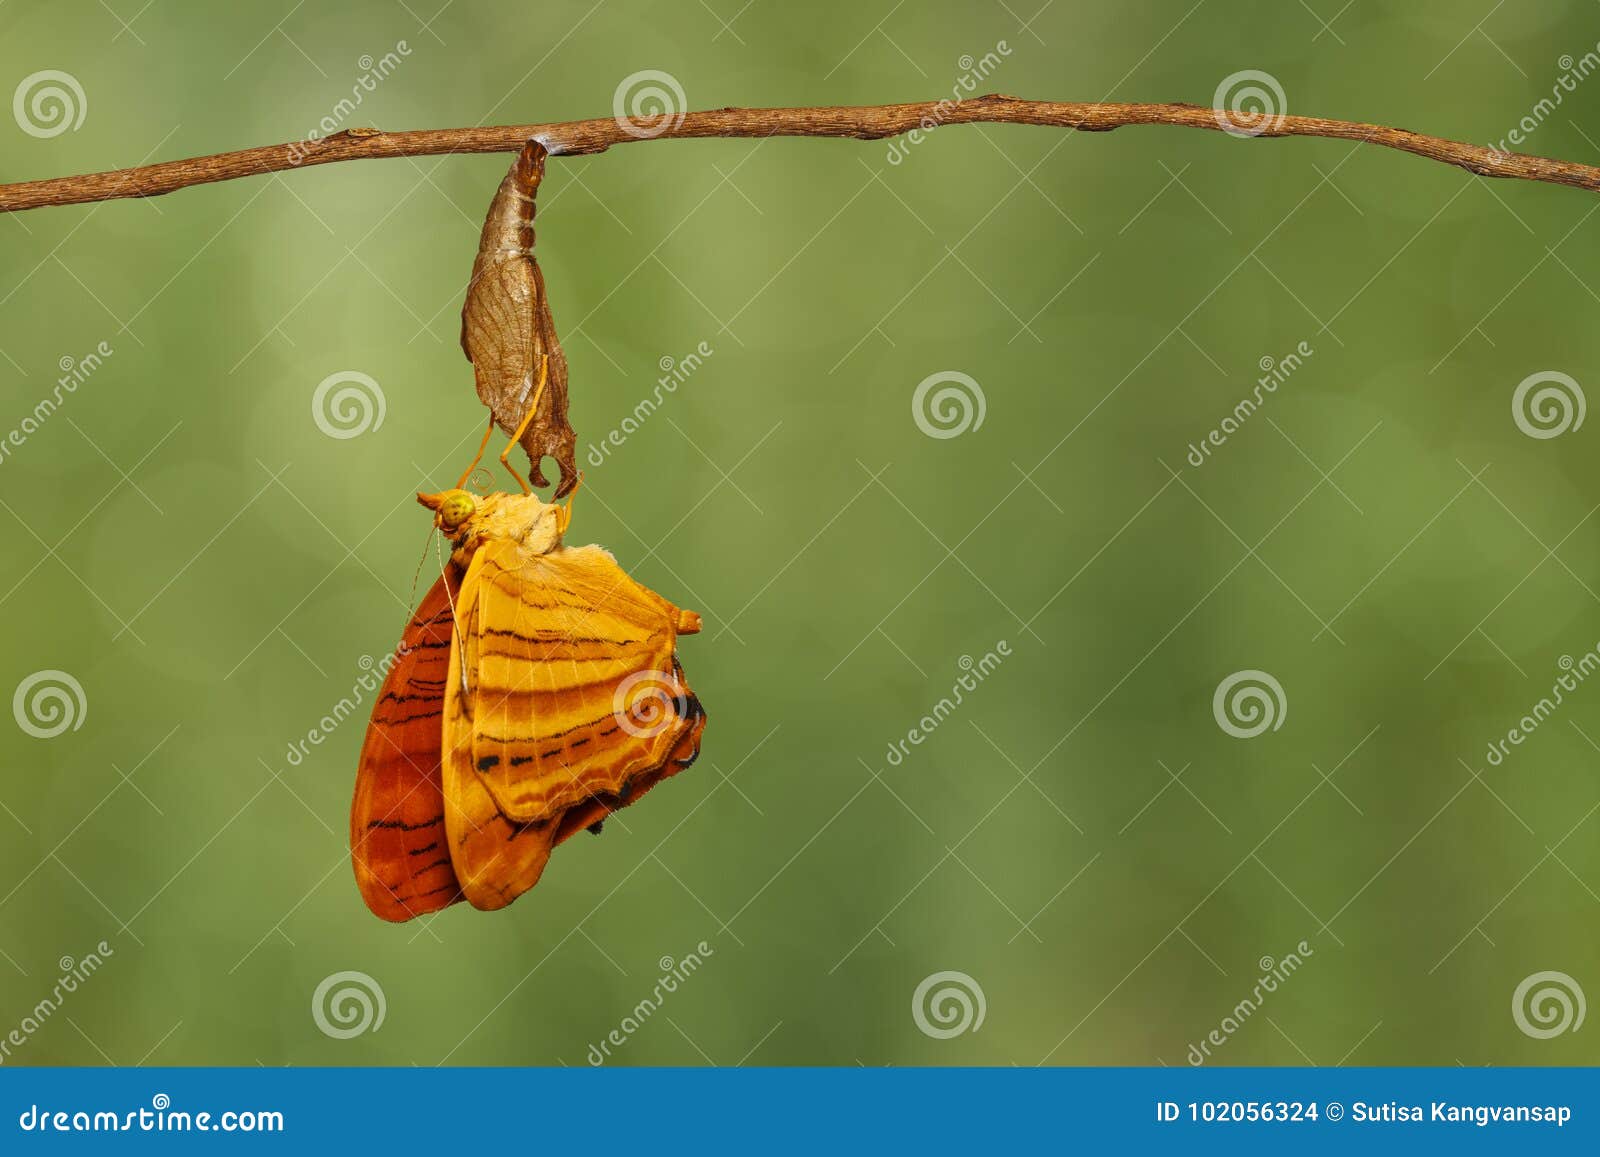 common maplet chersonesia risa butterfly hanging on twig